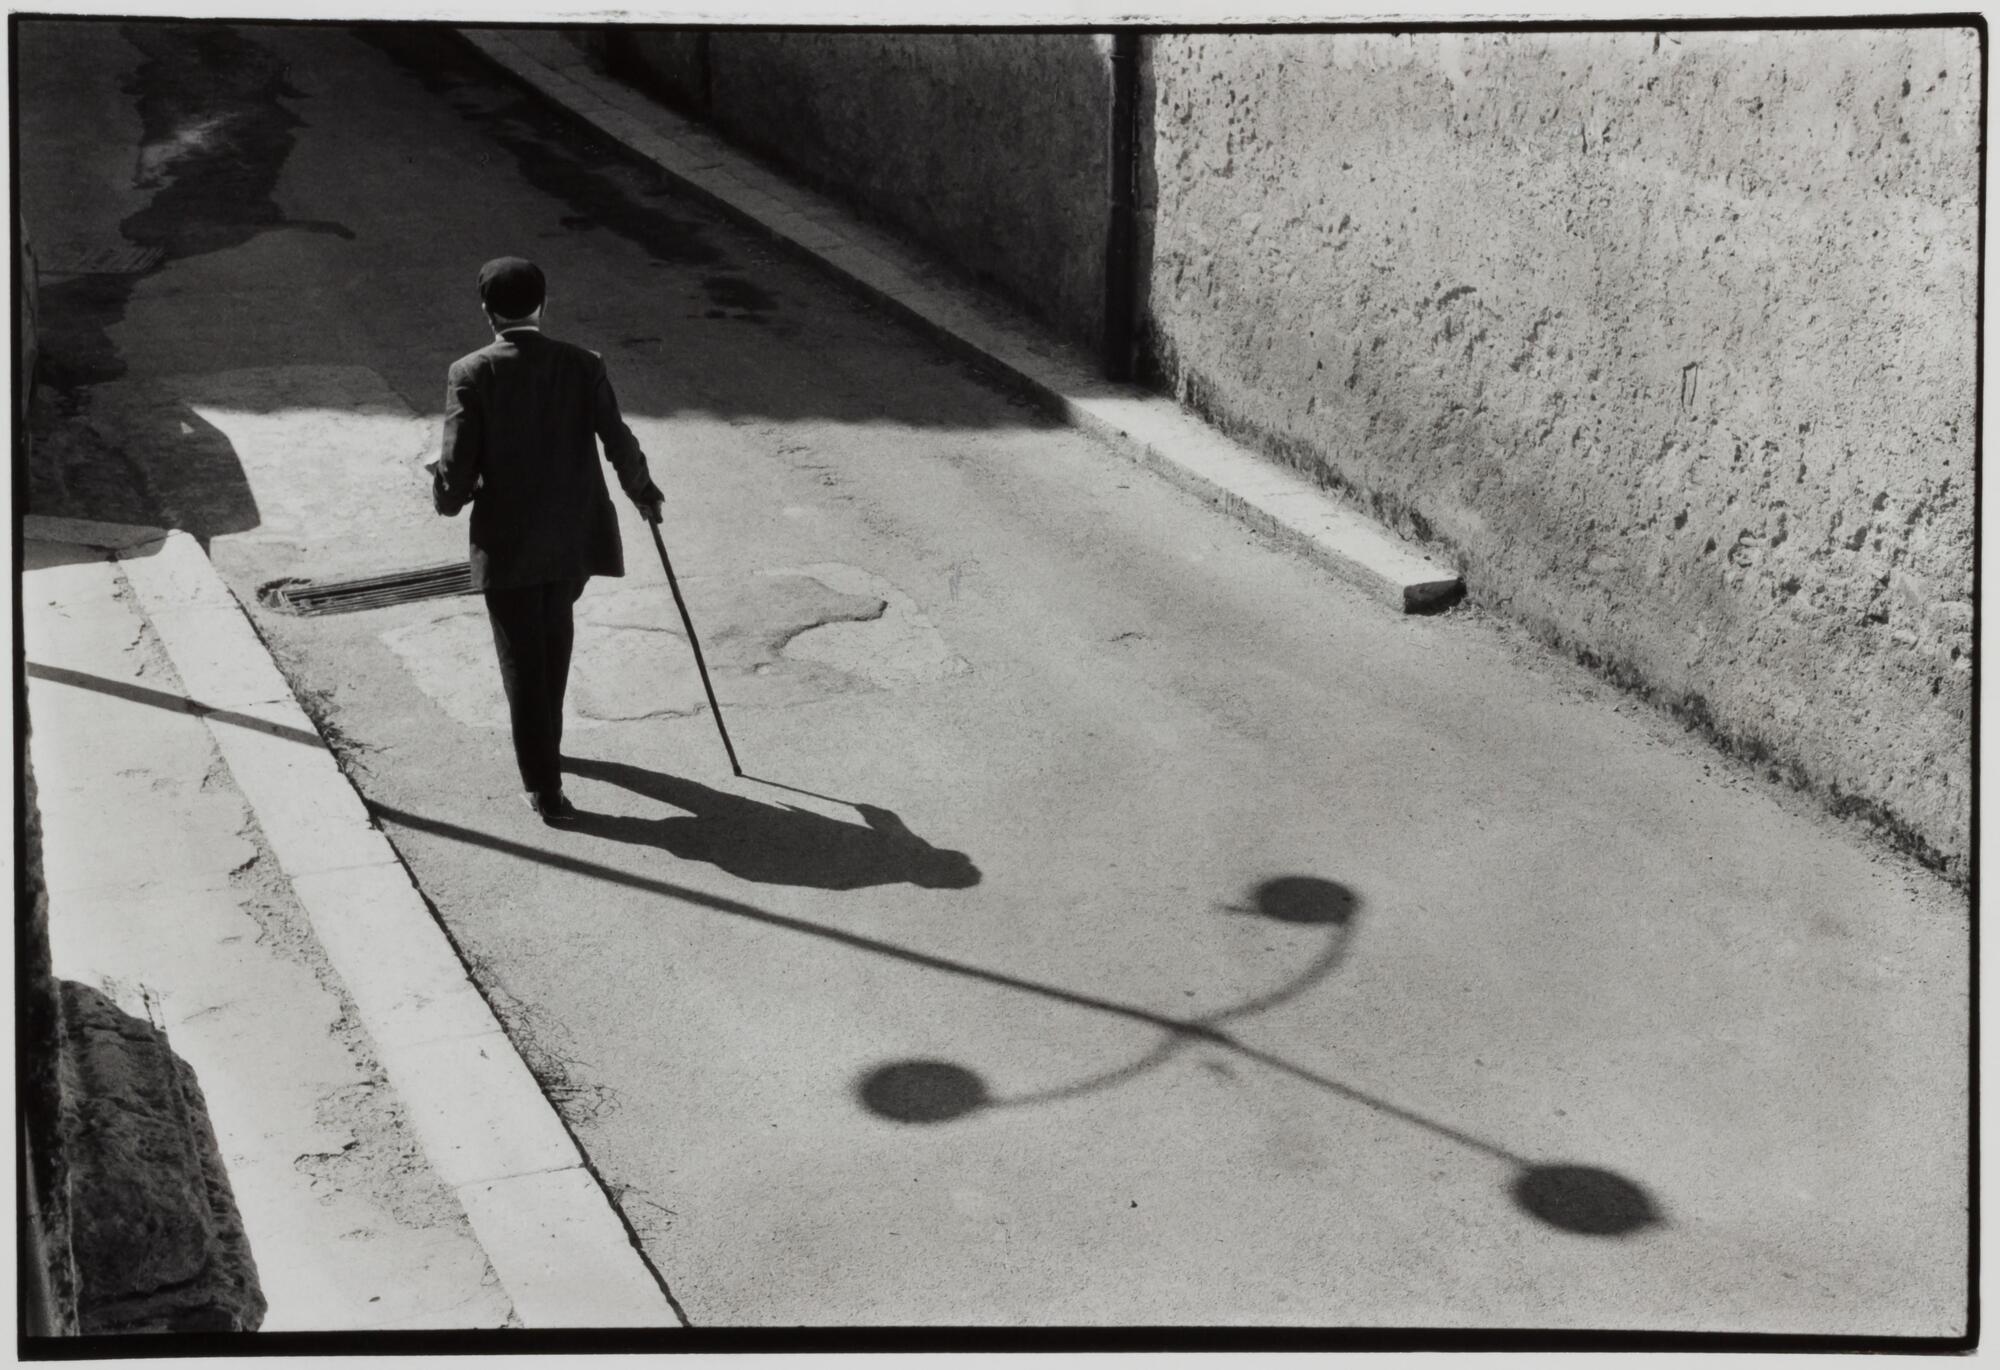 A man walking down the street using a cane. There are shadows reflected on the sidewalk.